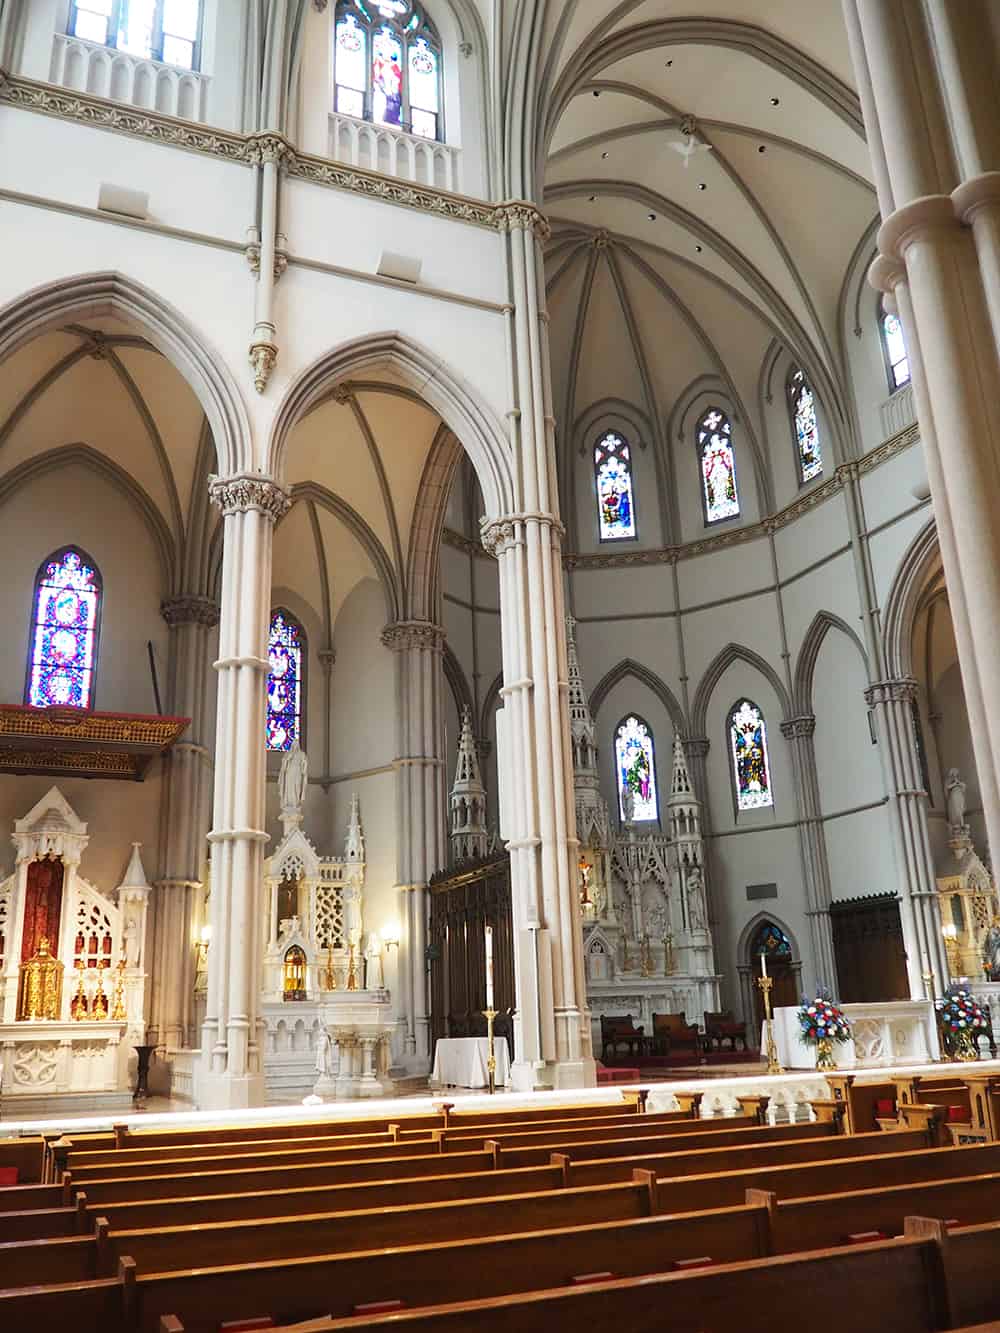 The Saint Paul Cathedral in Pittsburgh Pennsyvlania was built in a Gothic Revival style and has a pipe organ donated from Andrew Carnegie. | affordable family day trip + places to visit in Pittsburgh, Pennsylvania via Autumn All Along